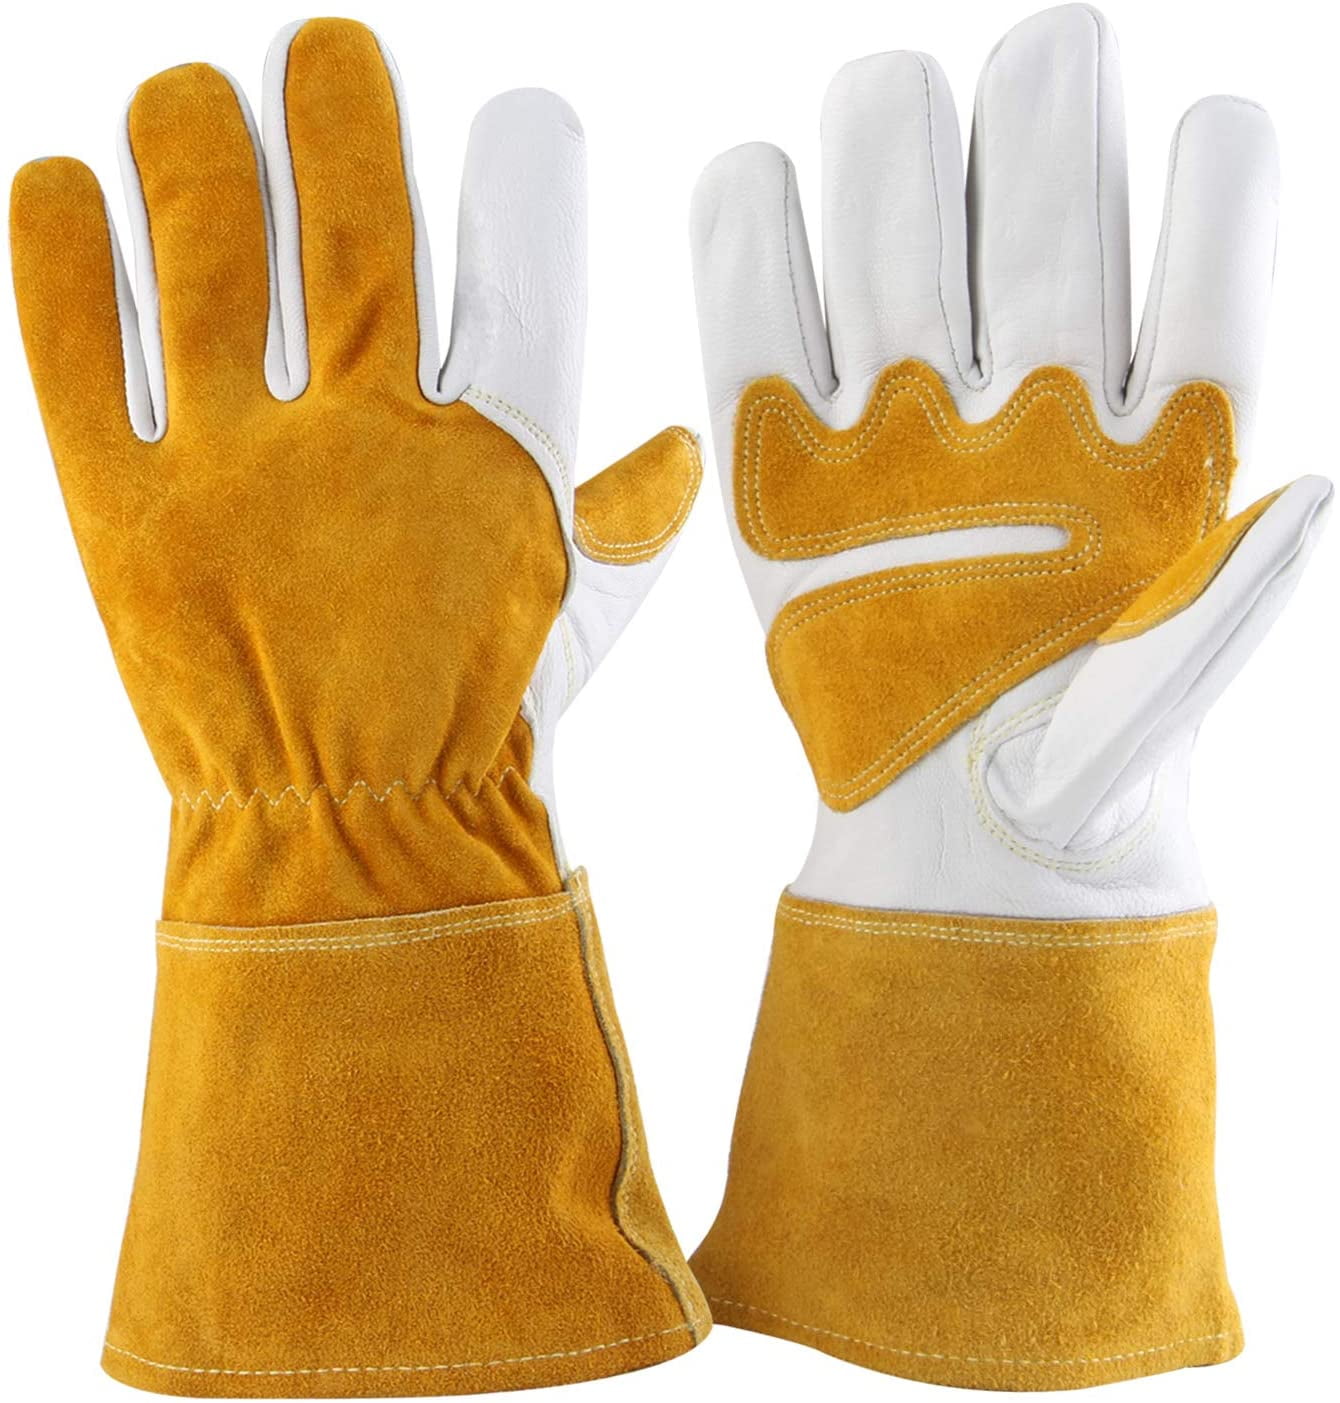 3 Pairs Pack Garden Work Gloves Textured Latex Palm for Grip Thorn Resistance and Water Dirty Resistance